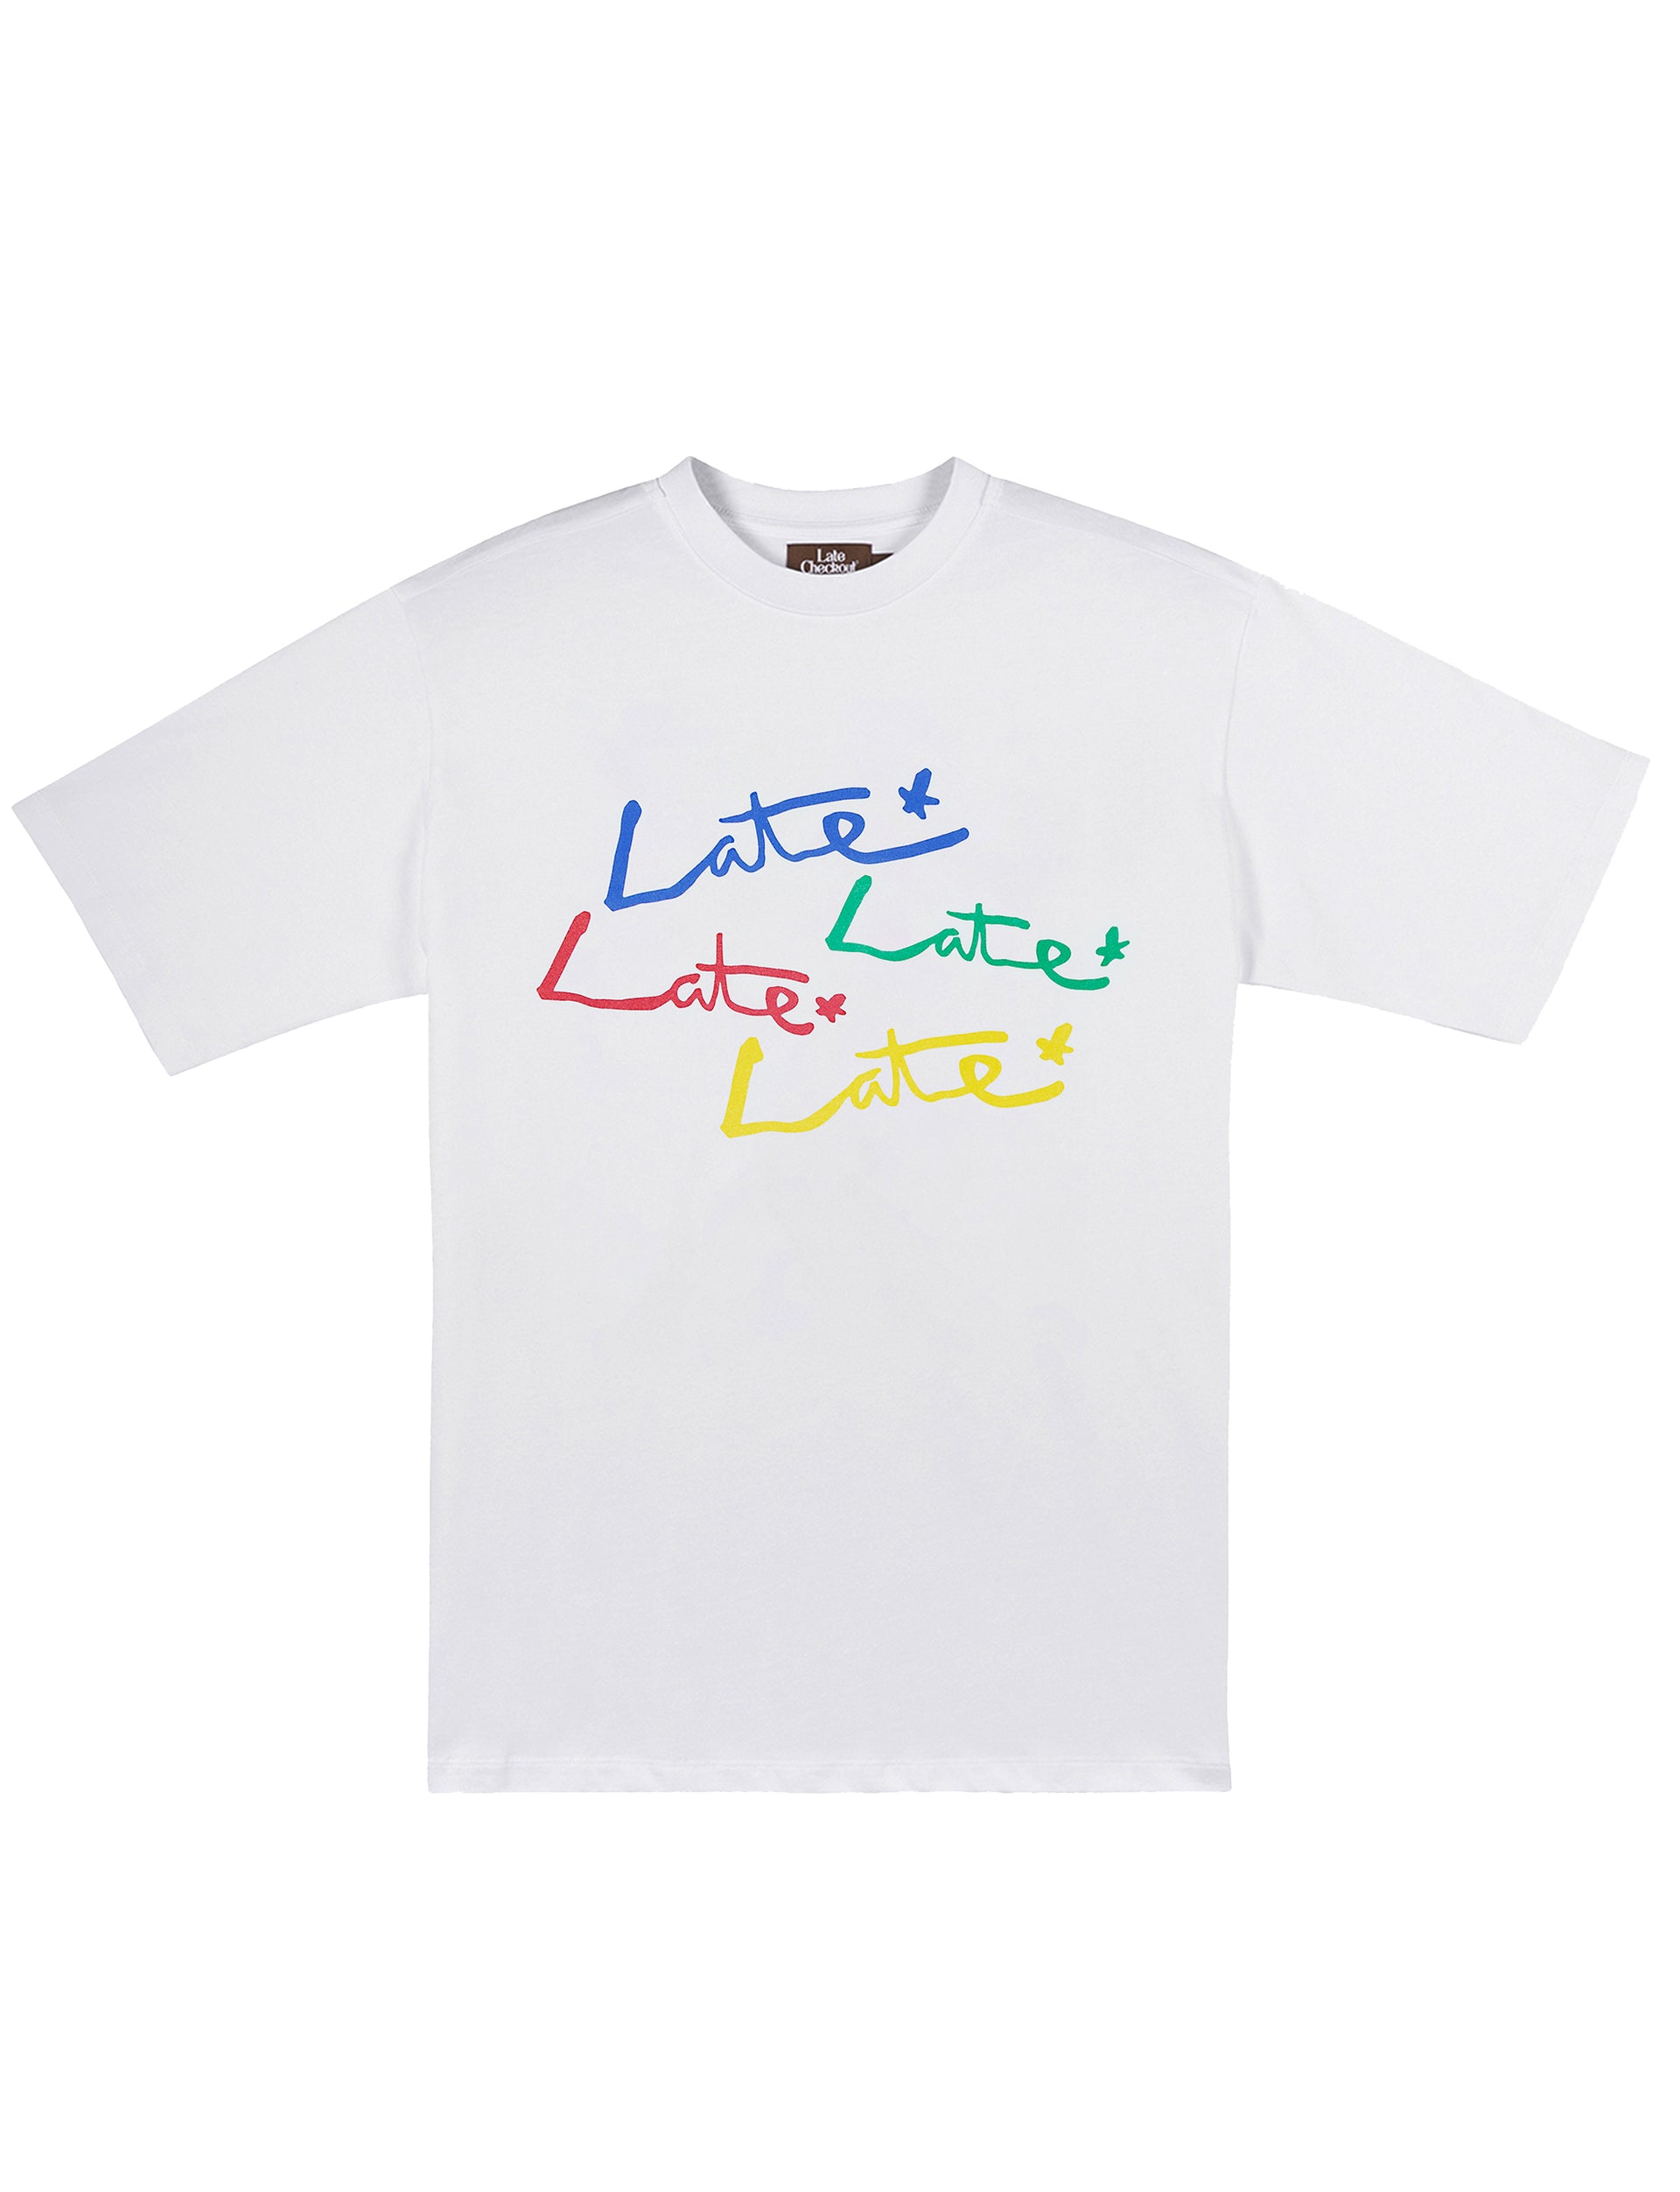 LATE CHECKOUT White Very Late Tee